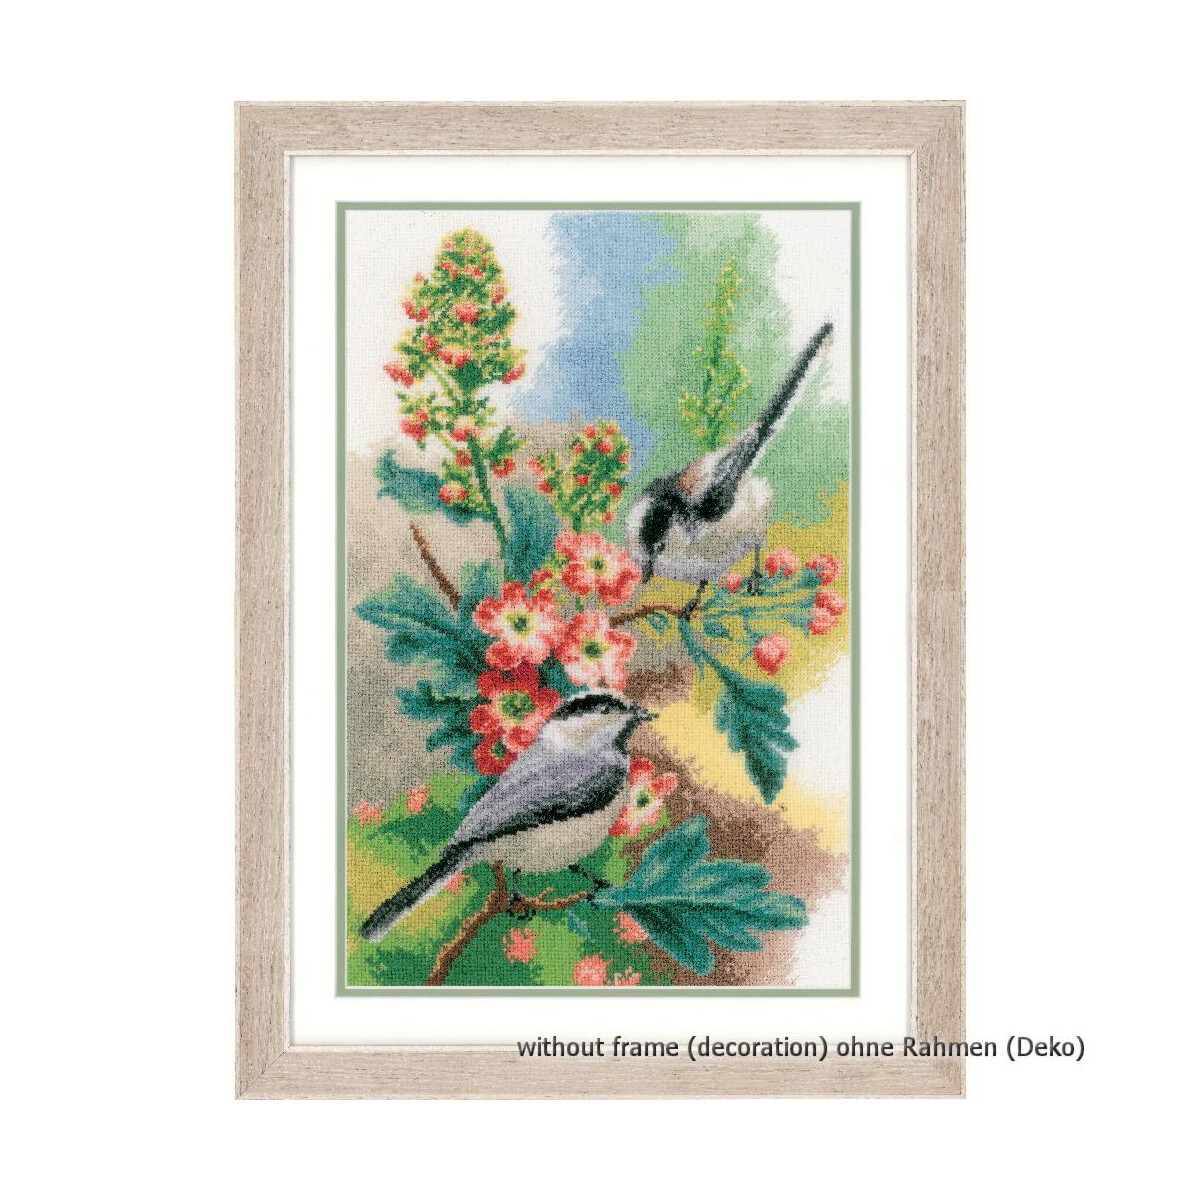 Vervaco counted cross stitch kit Birds & flowers, DIY